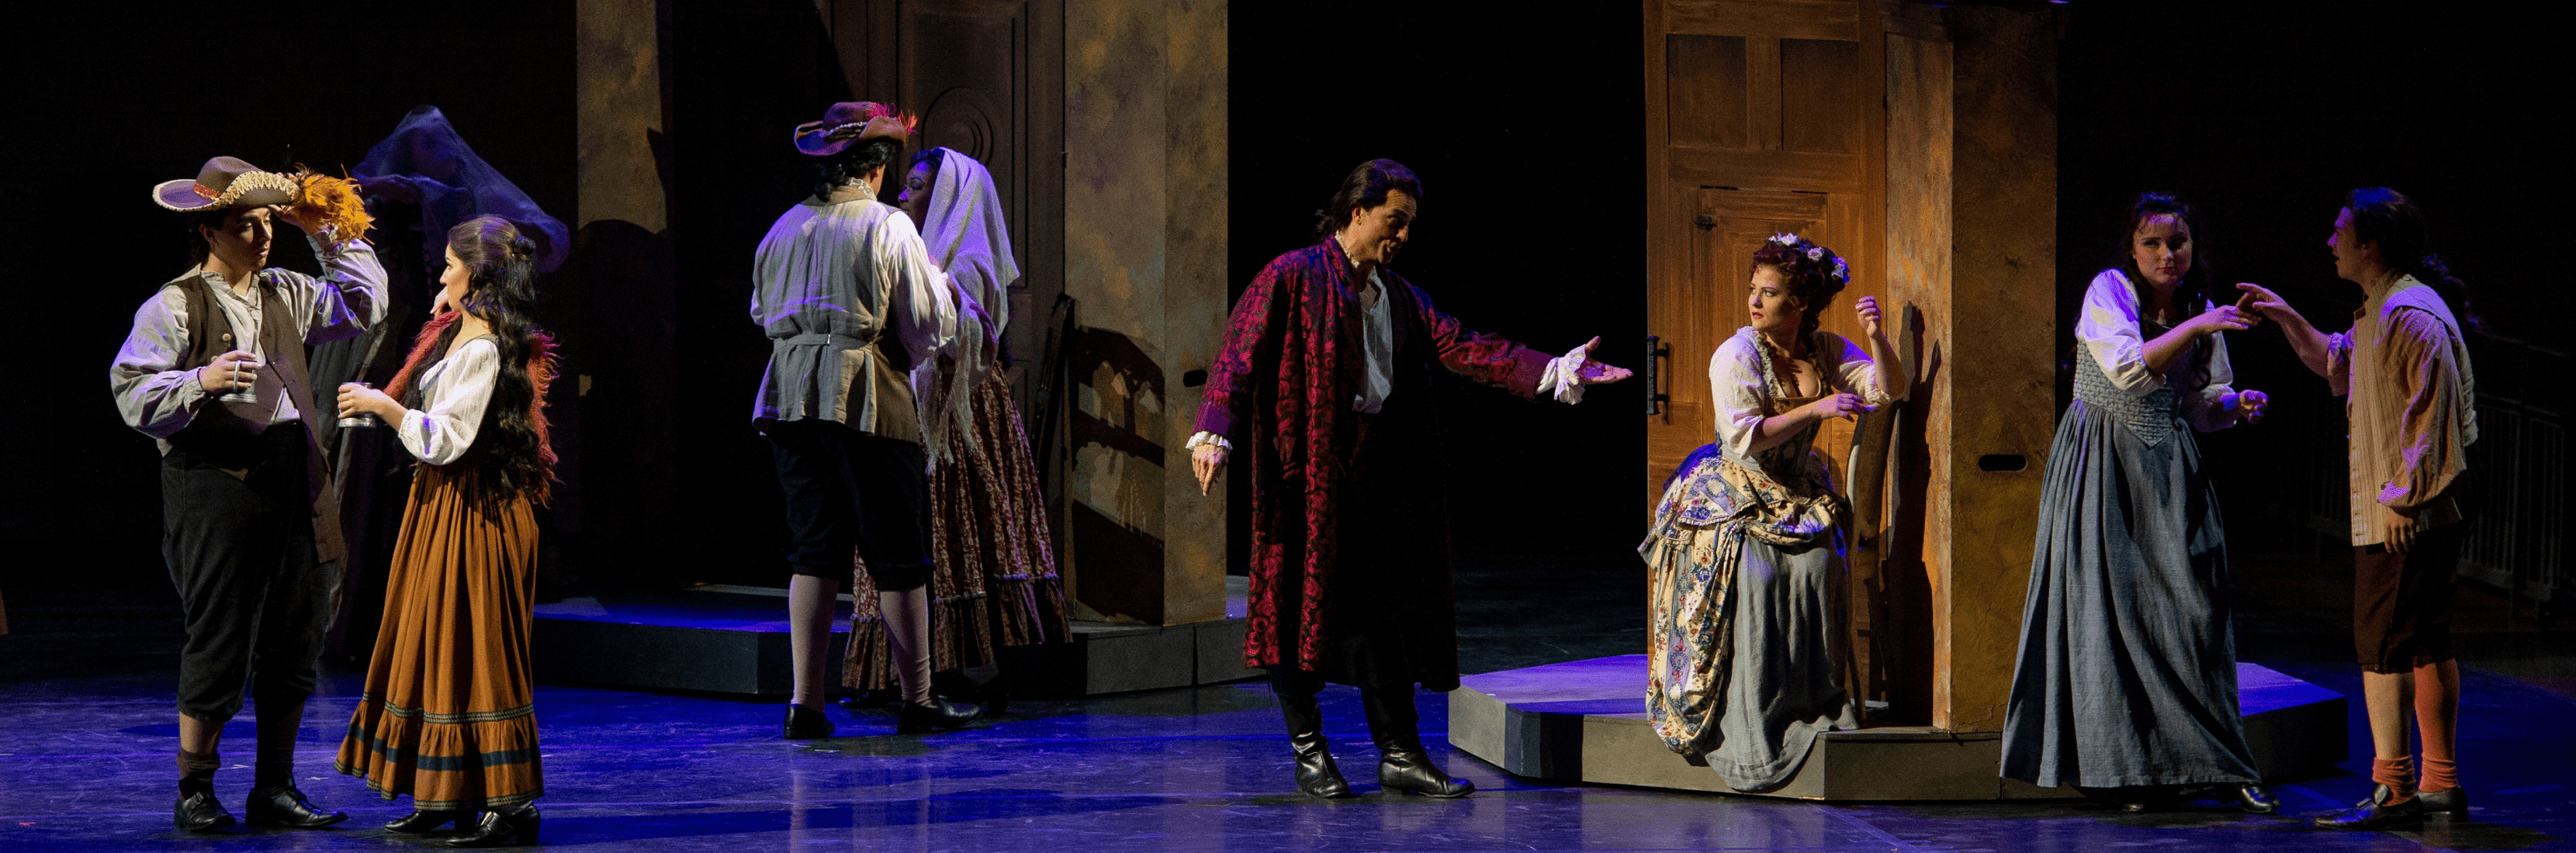 Don Giovanni Performance on Stage